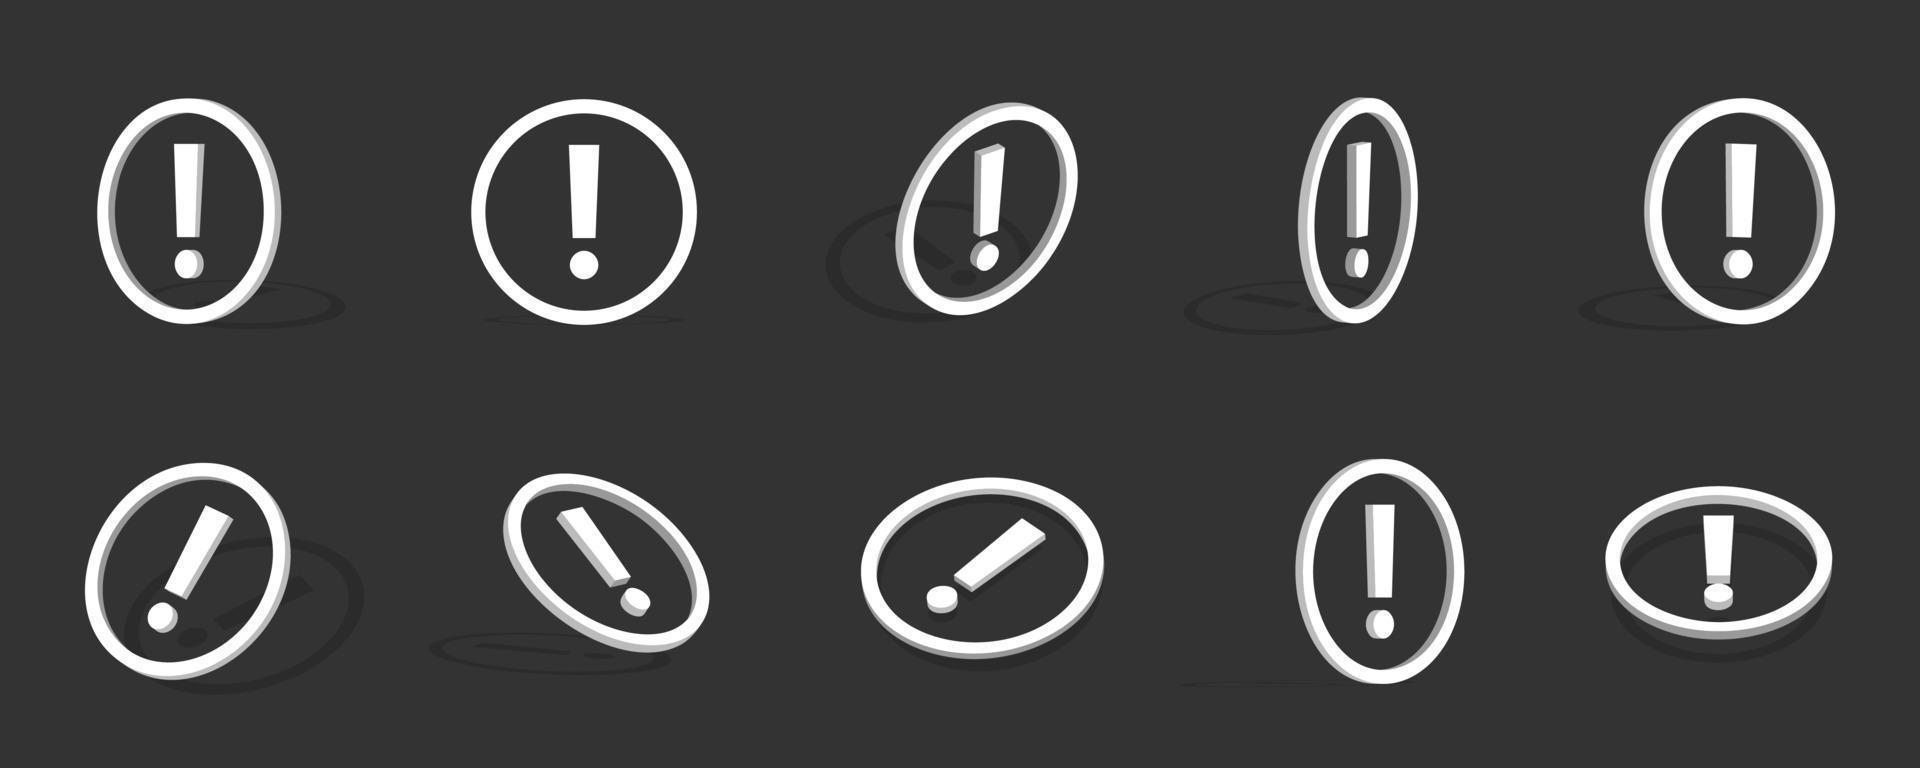 White exclamation mark 3d icon illustration with different views vector